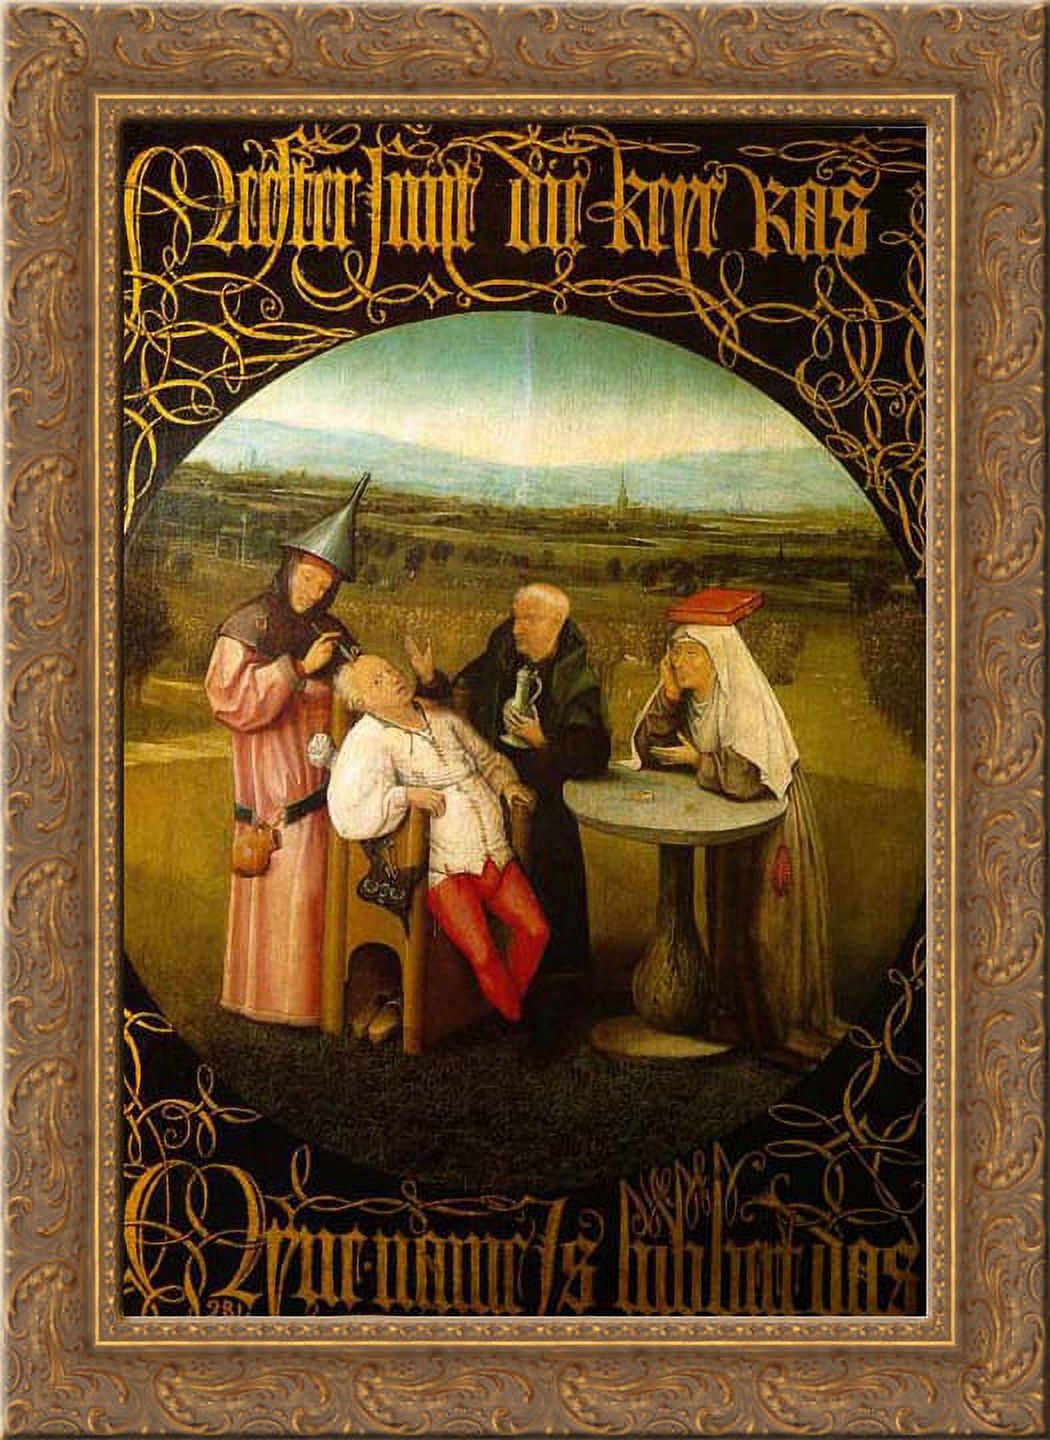 The Stone Operation / The Extraction of the Stone Madness / The Cure of Folly 20x24 Gold Ornate Wood Framed Canvas Art by Bosch, Hieronymus - image 1 of 2